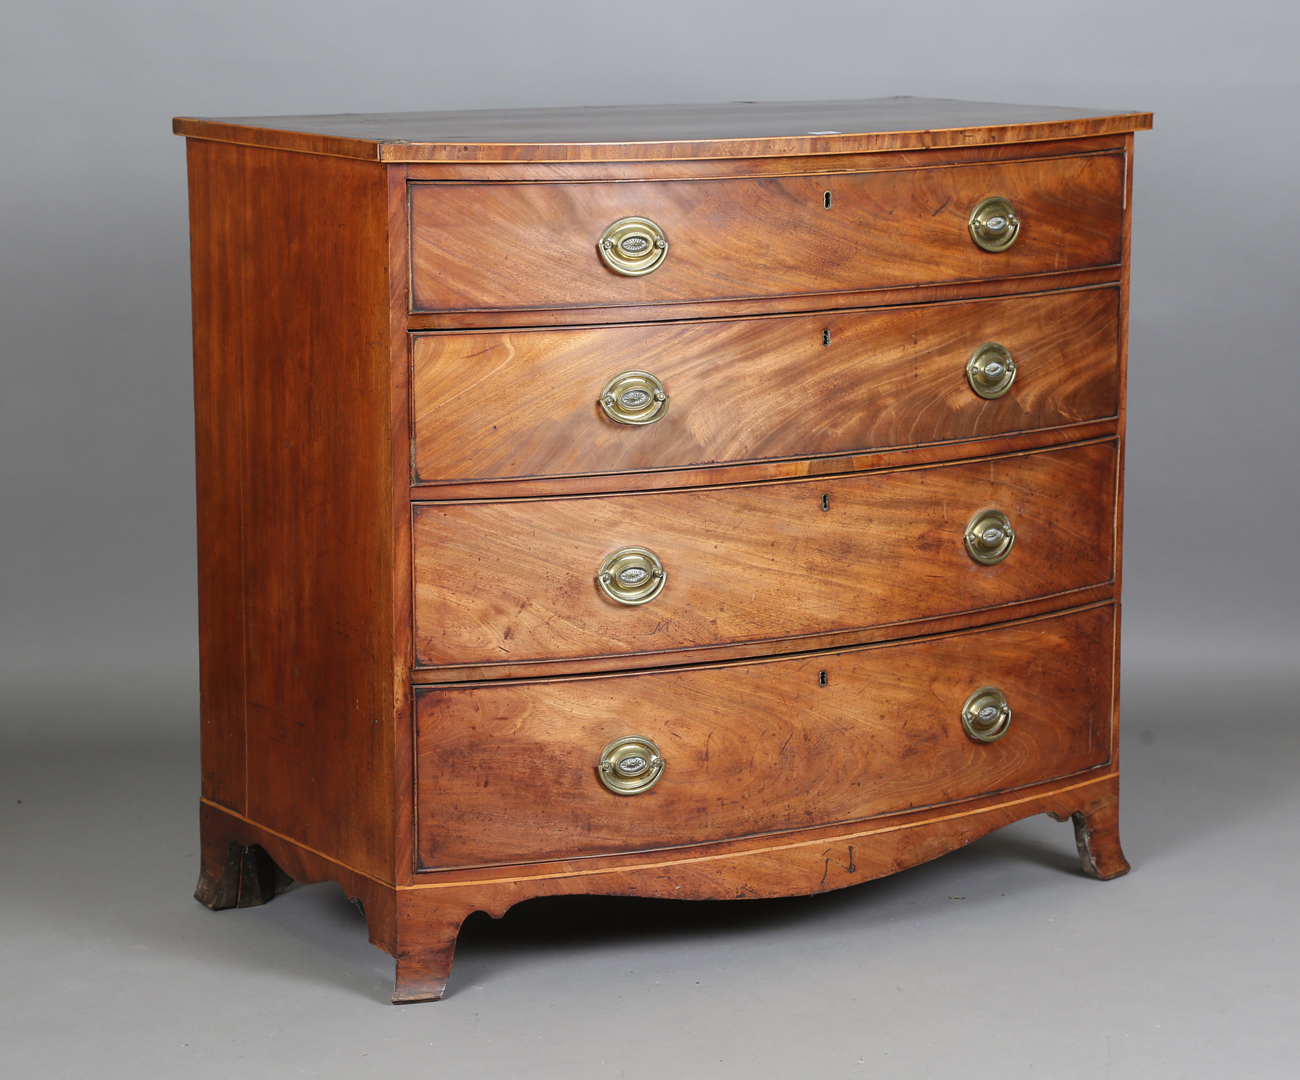 A George III mahogany bowfront chest of oak-lined drawers, the top with a wide crossbanded border,